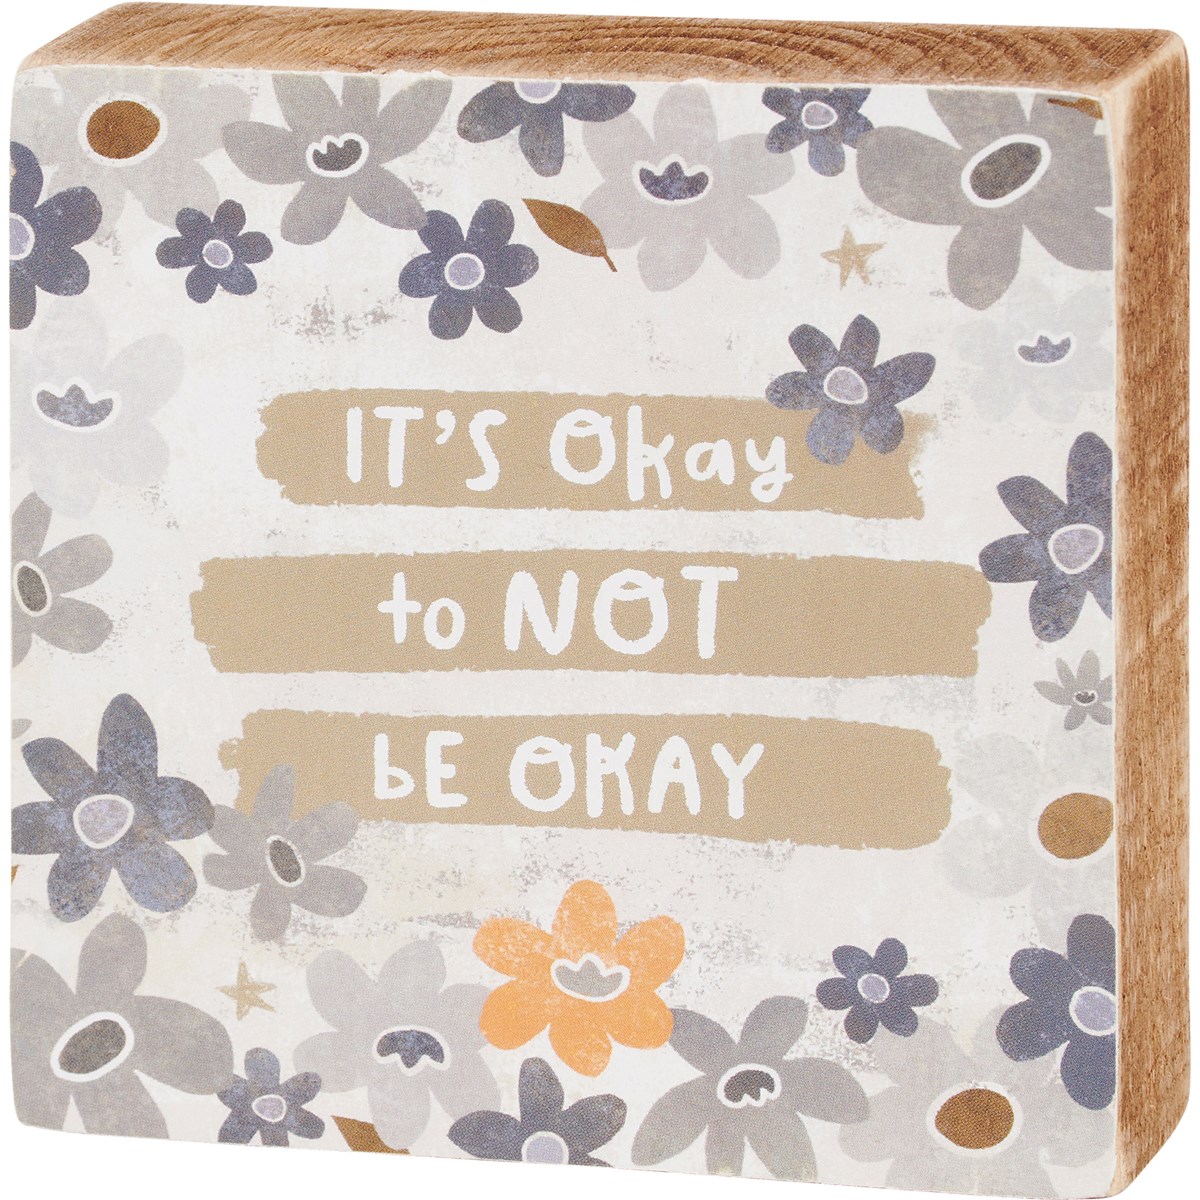 It's Okay To Not Be Okay Block Sign - Wood, Paper